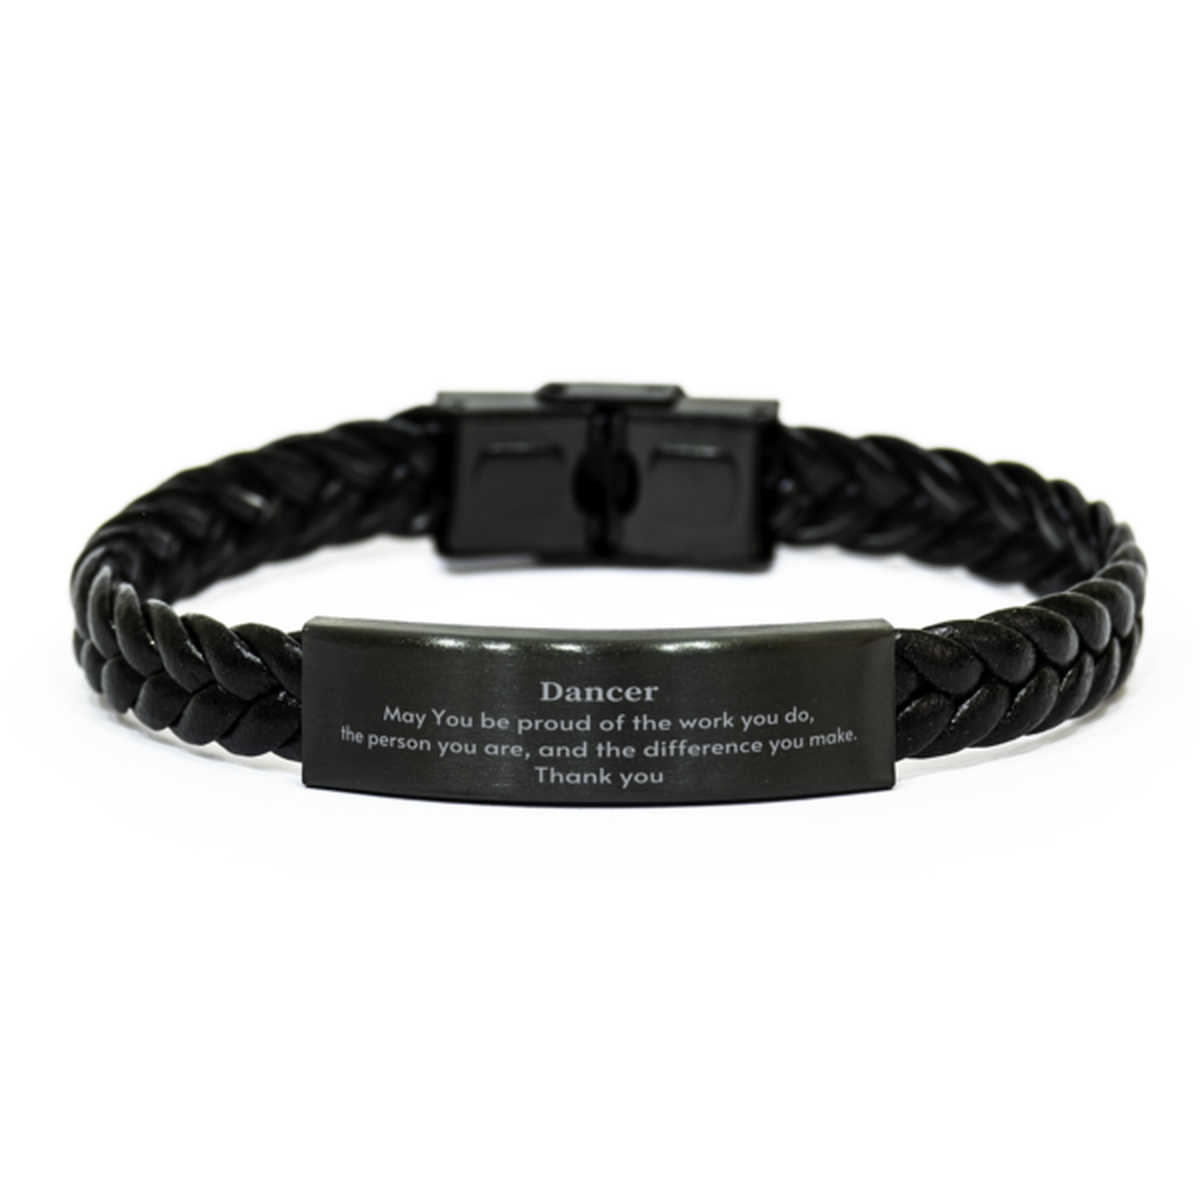 Heartwarming Braided Leather Bracelet Retirement Coworkers Gifts for Dancer, Dancer May You be proud of the work you do, the person you are Gifts for Boss Men Women Friends